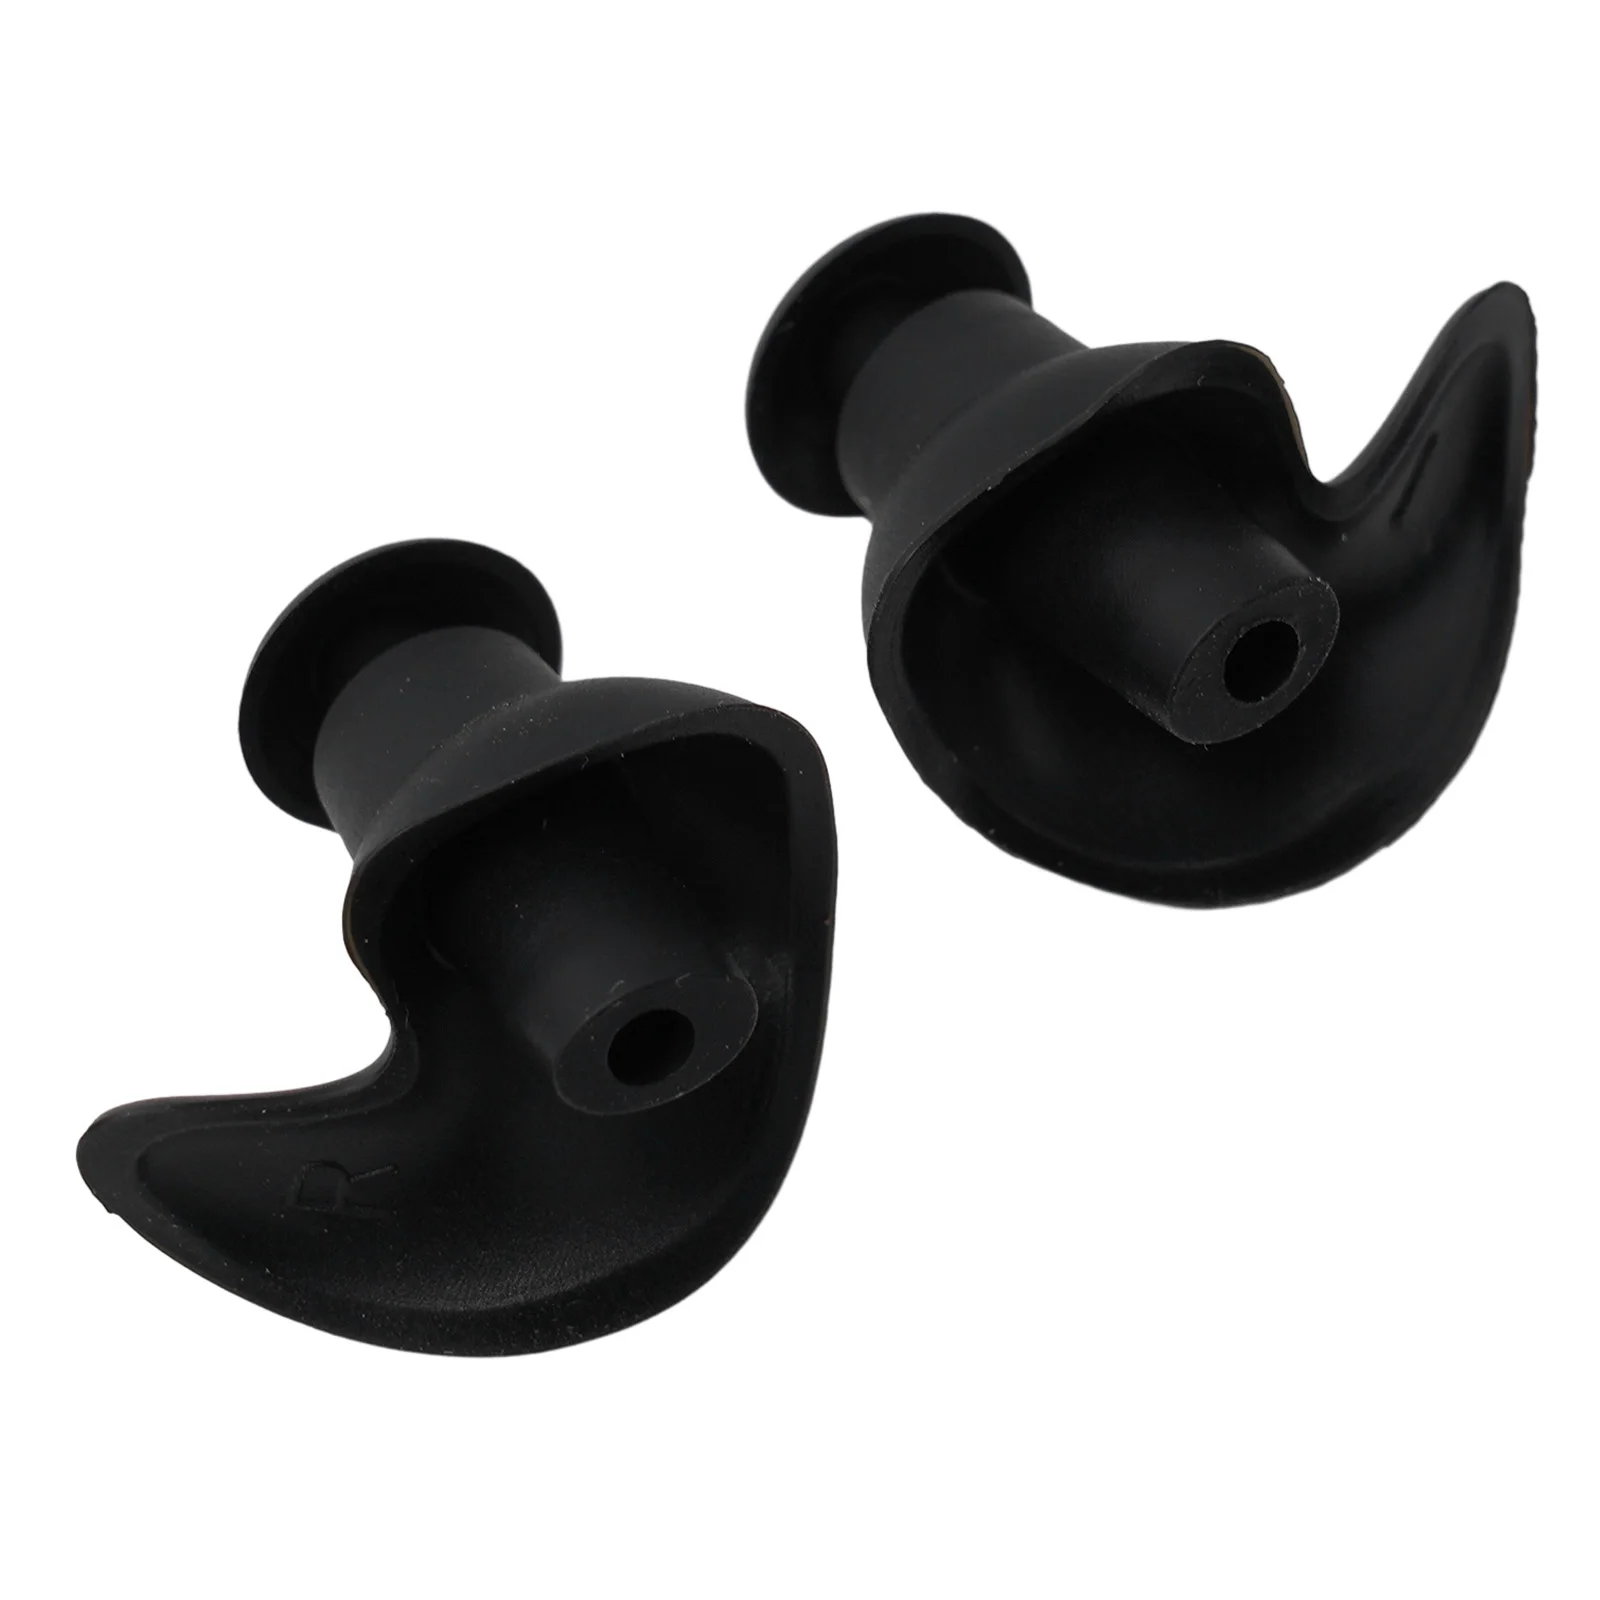 

Spiral Earplugs for Swimming, Soundproof and Leakproof, Ergonomic Modeling, Lightweight Silicone Material 1 Pair